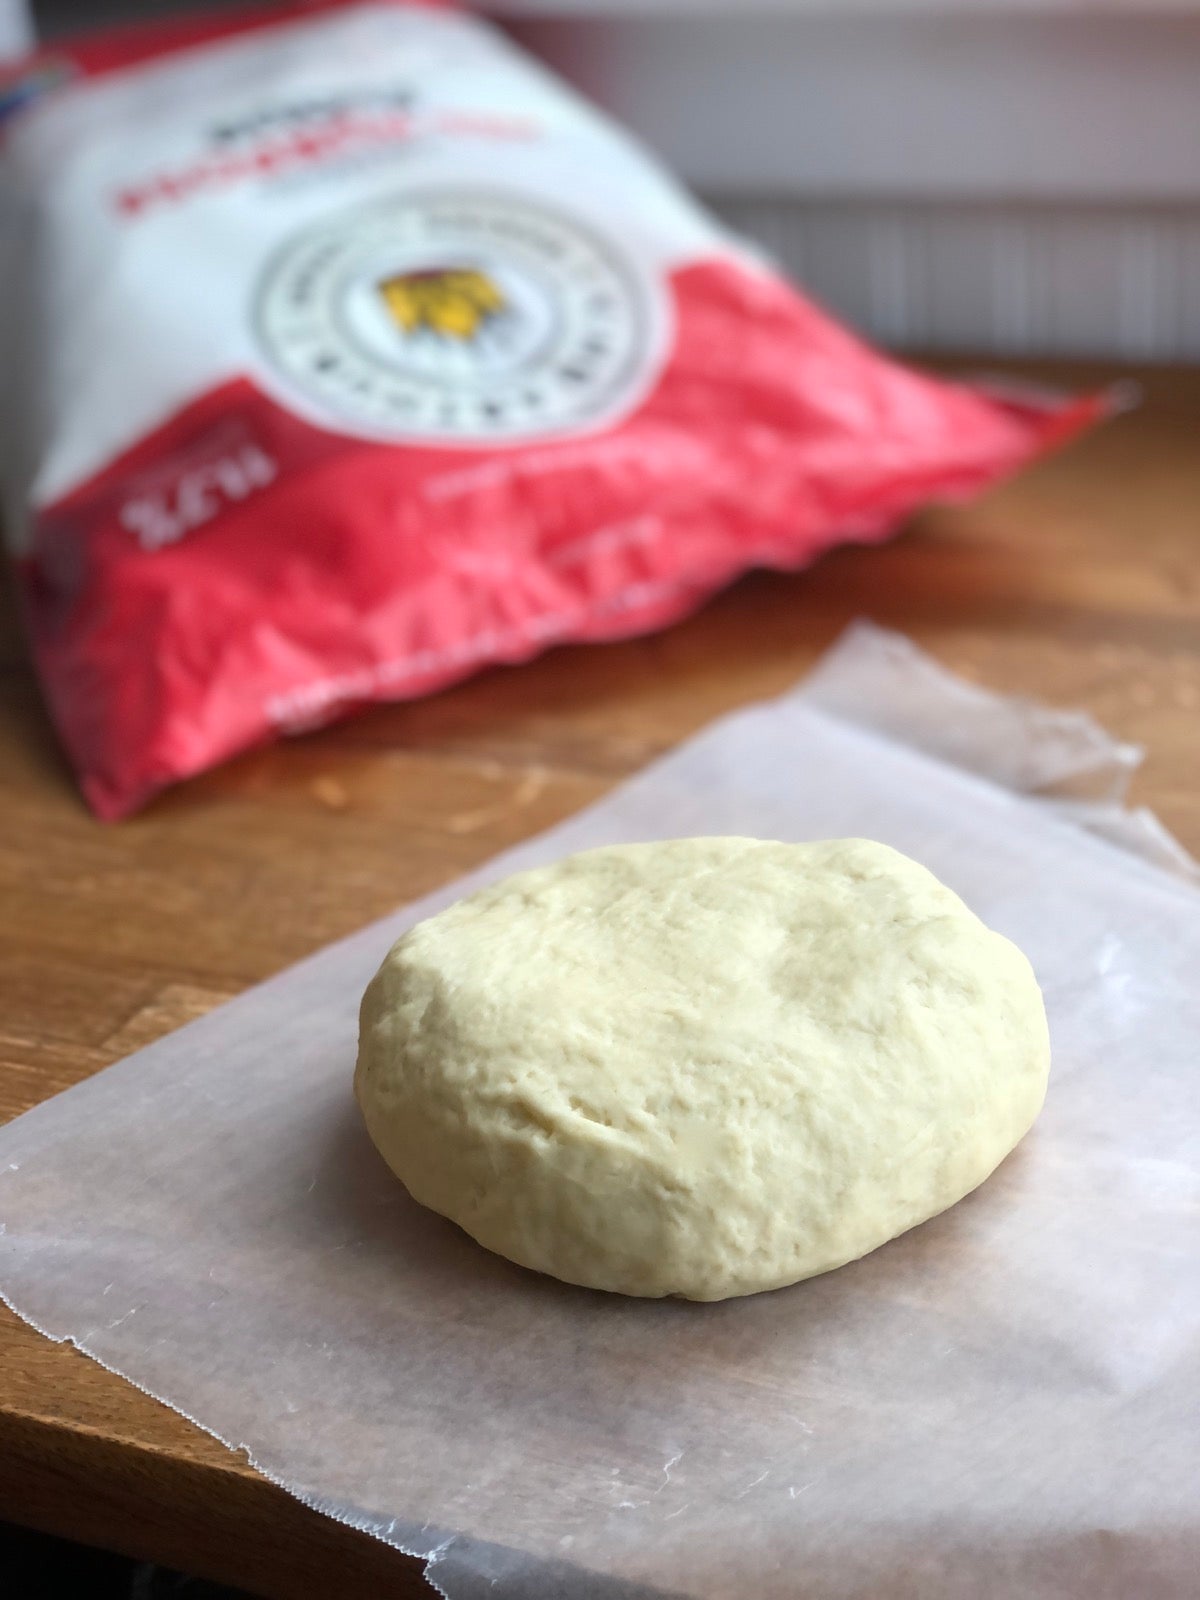 Pierogi dough flattened into a disc, ready to wrap and chill.